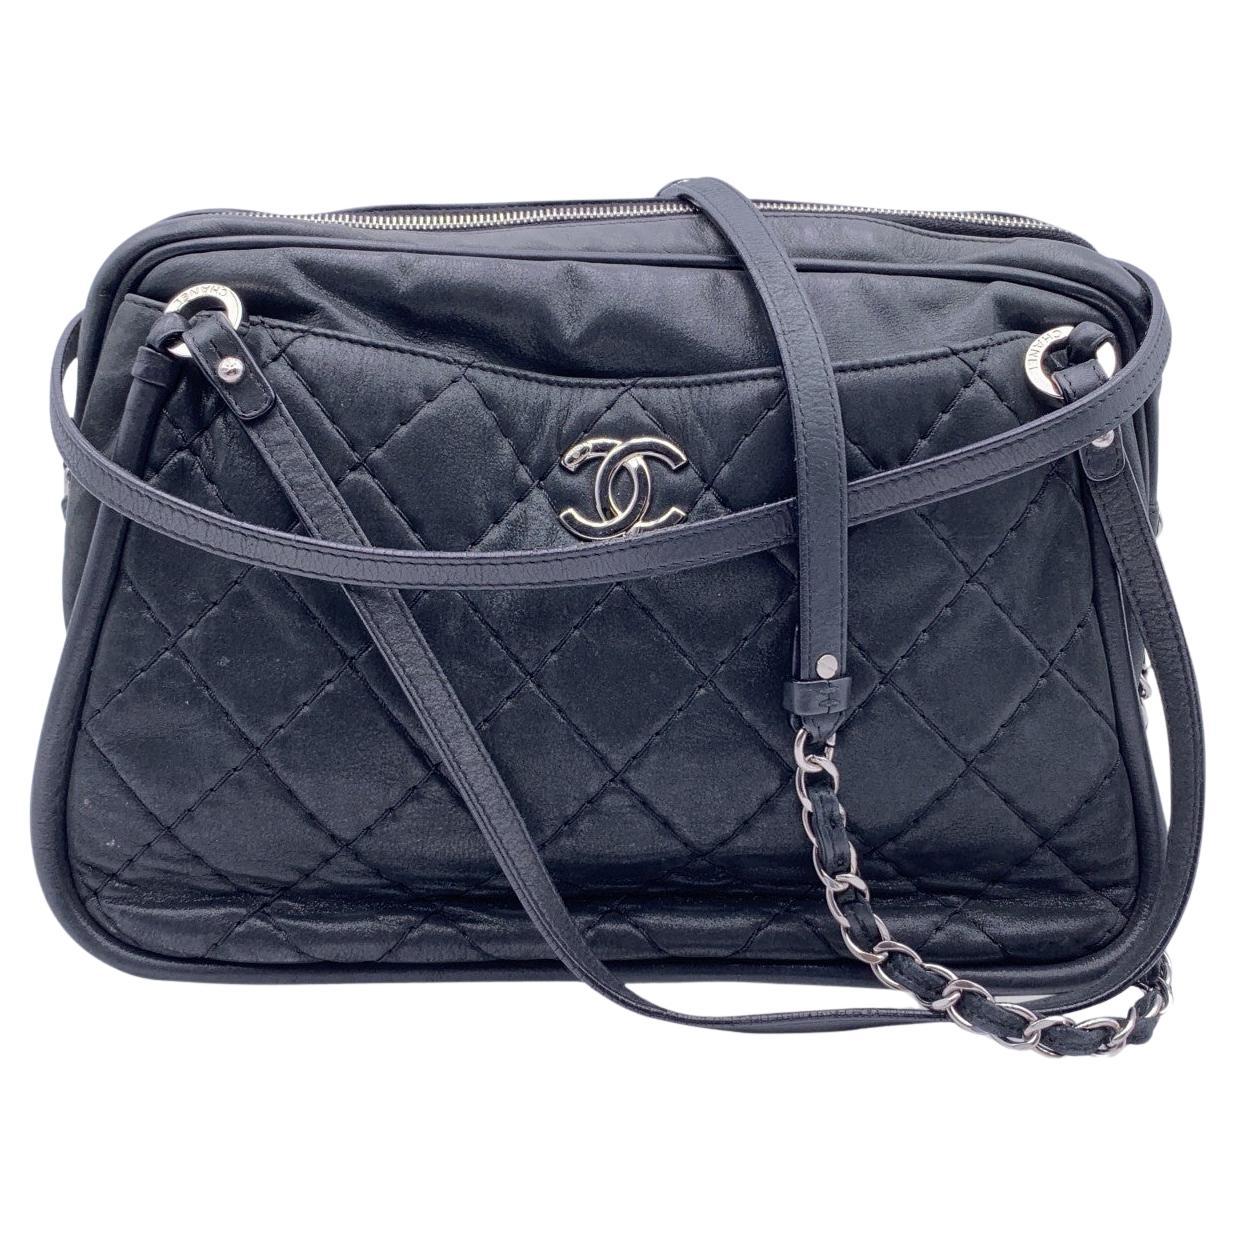 CHANEL black Quilted leather URBAN SPIRIT SMALL Backpack Bag For